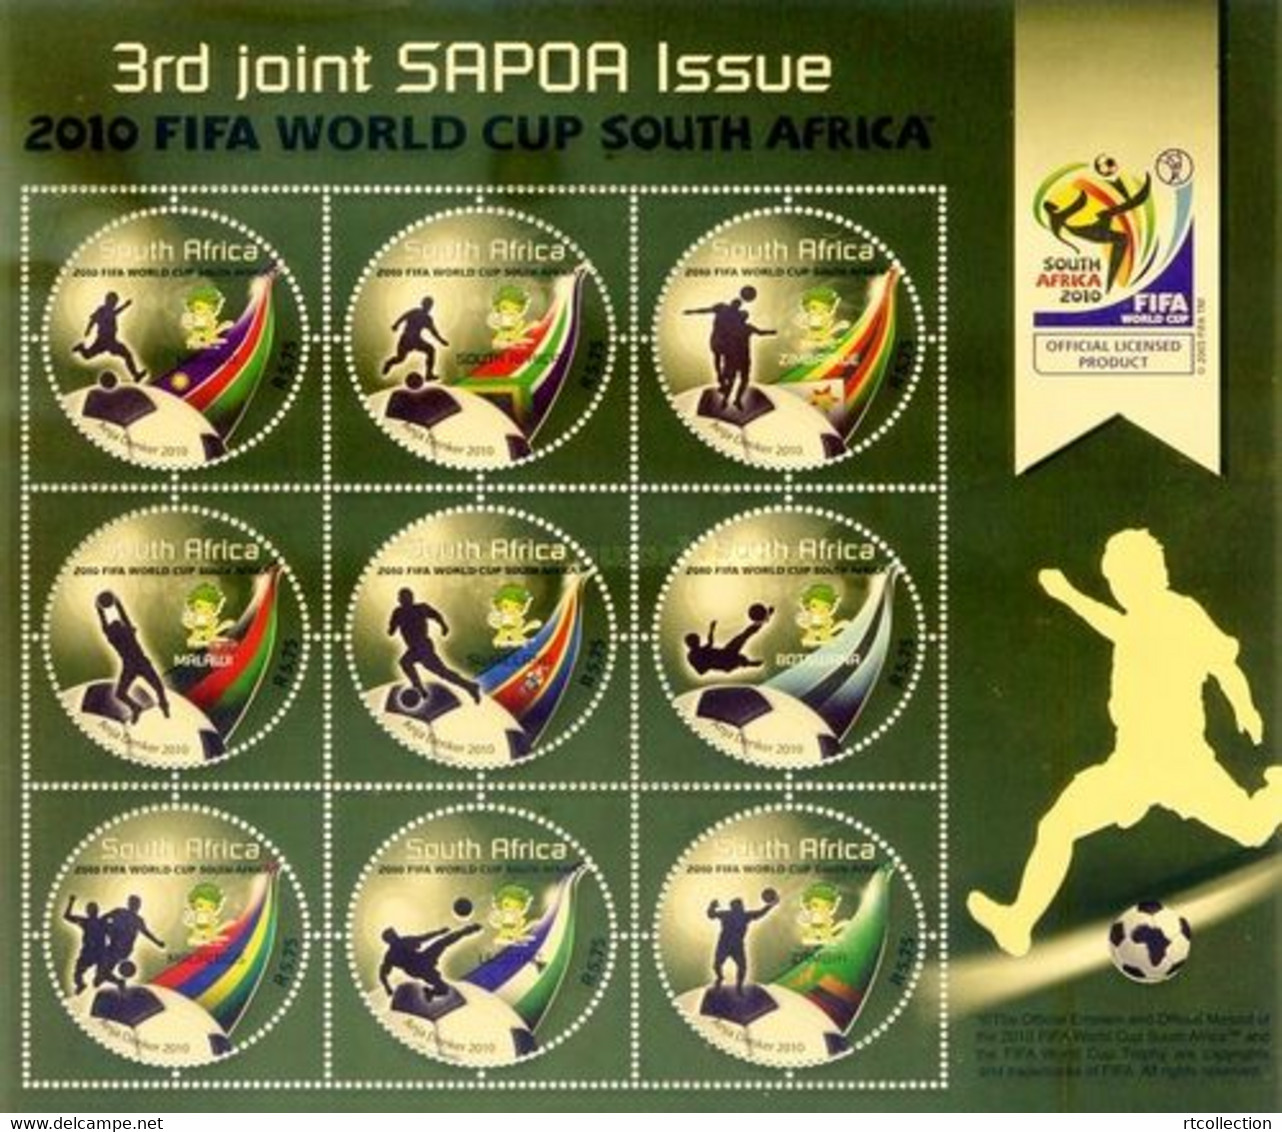 South Africa RSA 2010 Sheet 3rd Joint SAPOA Issue FIFA World Cup Football Game Soccer Sports Round Shap Stamps MNH - Ungebraucht